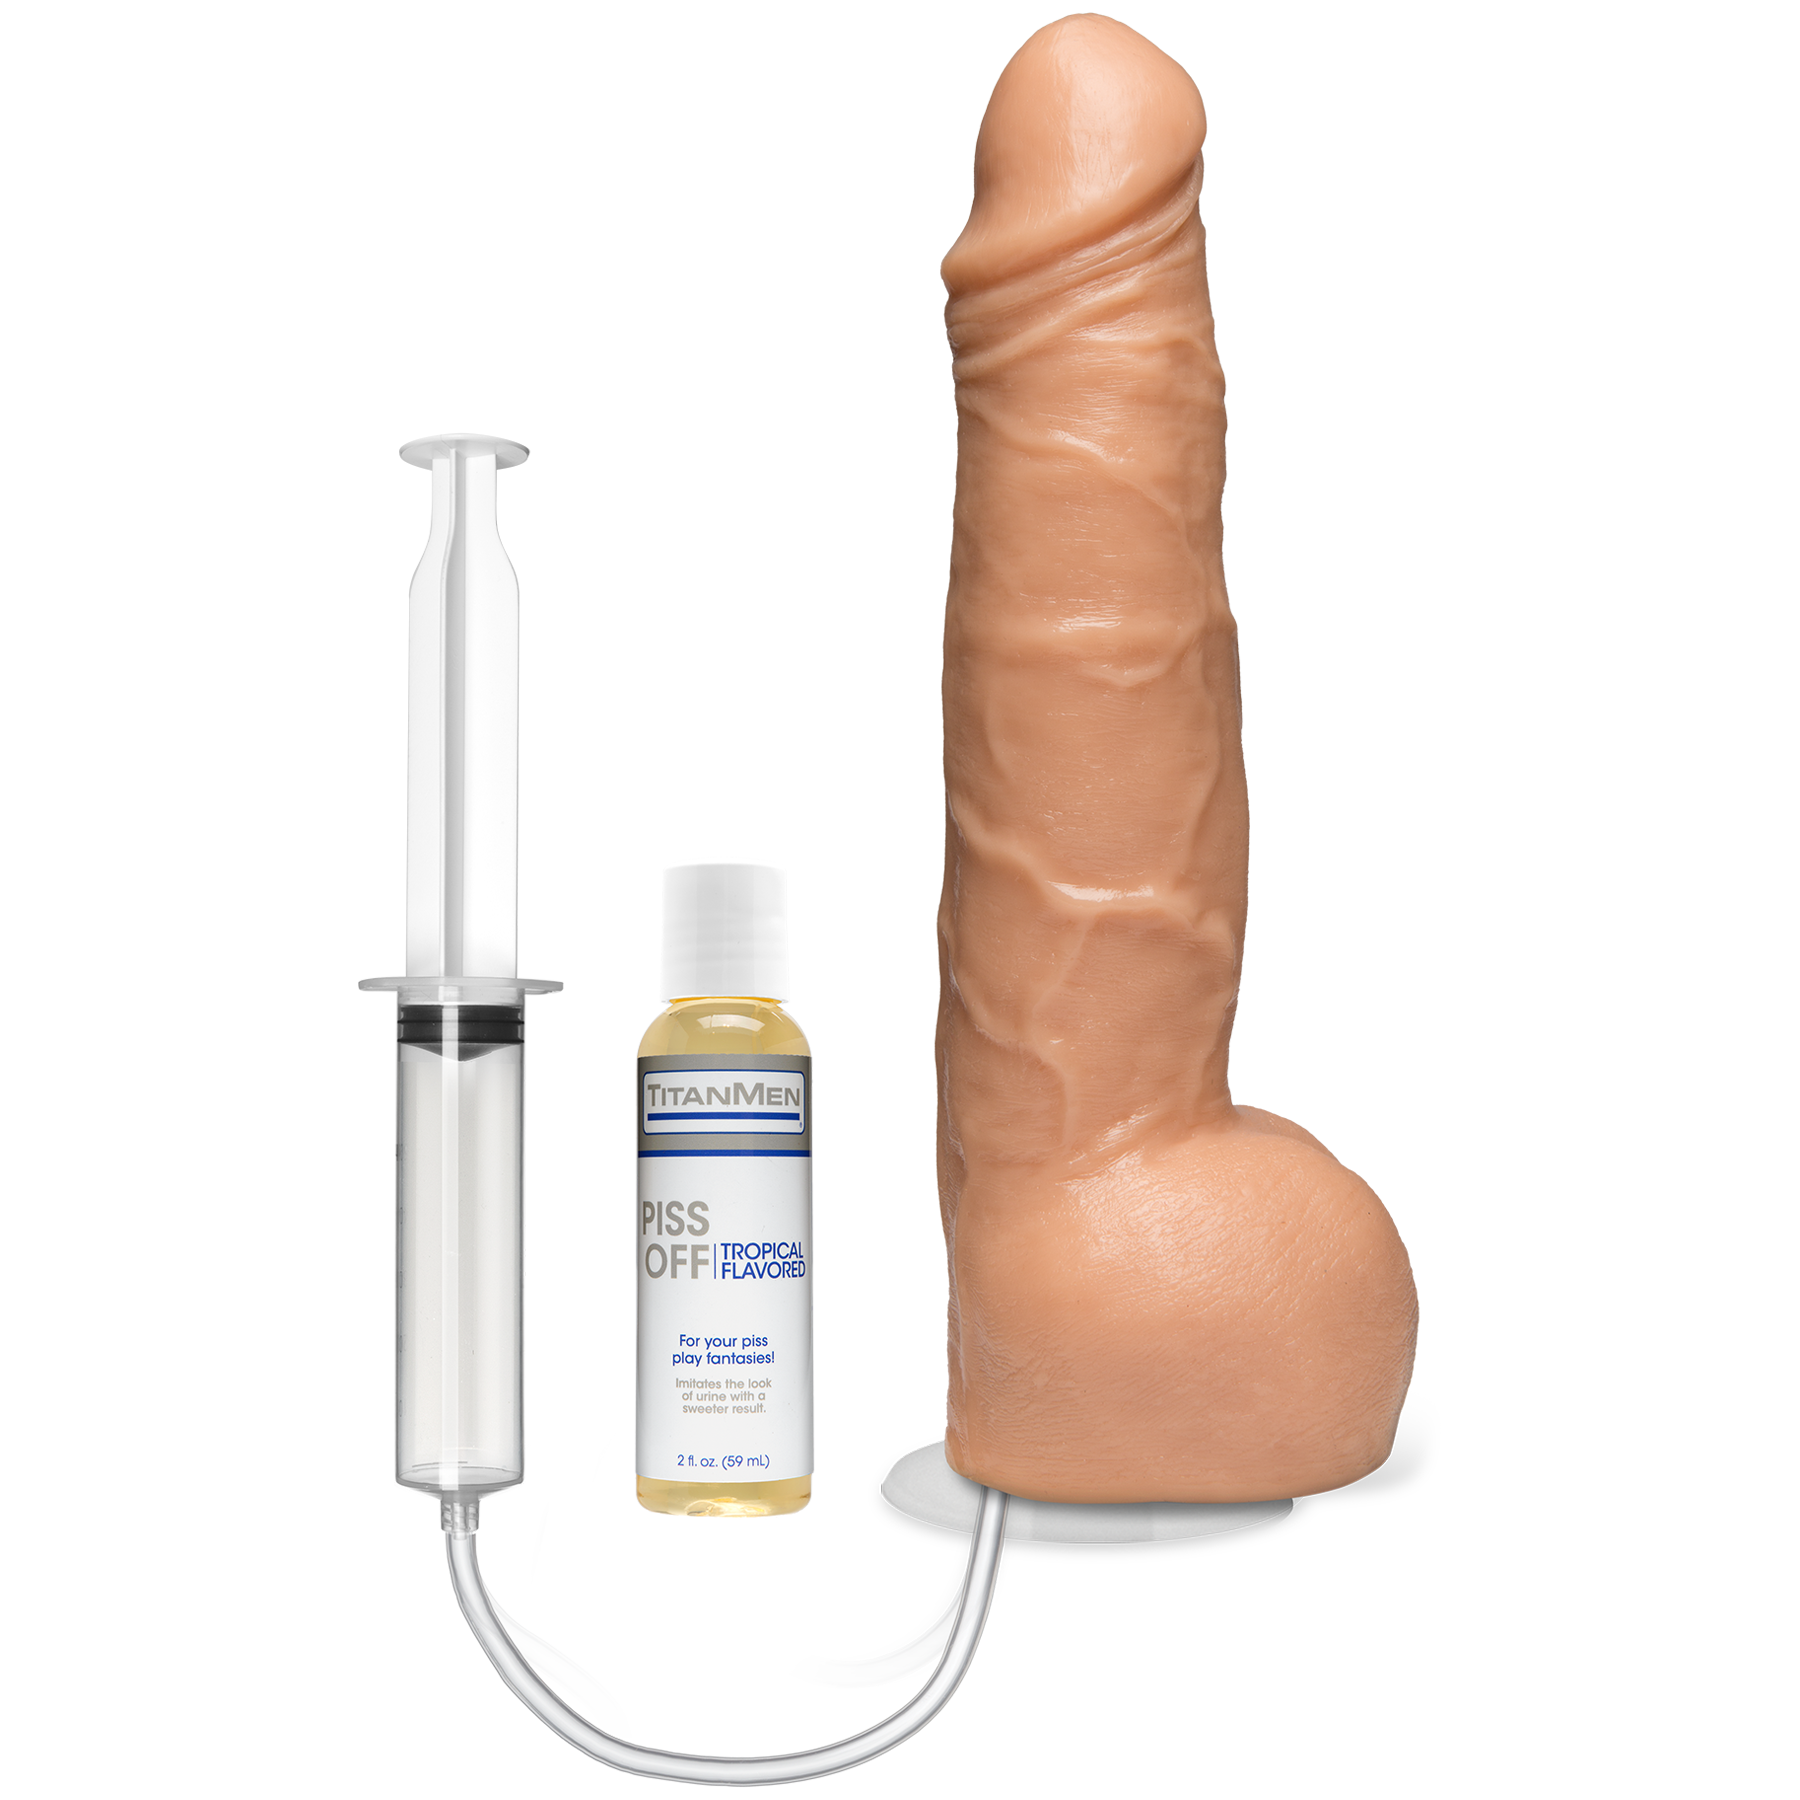 TitanMen - PissOff - Squirting Cock - With Removable Vac-U-Lock Suction Cup